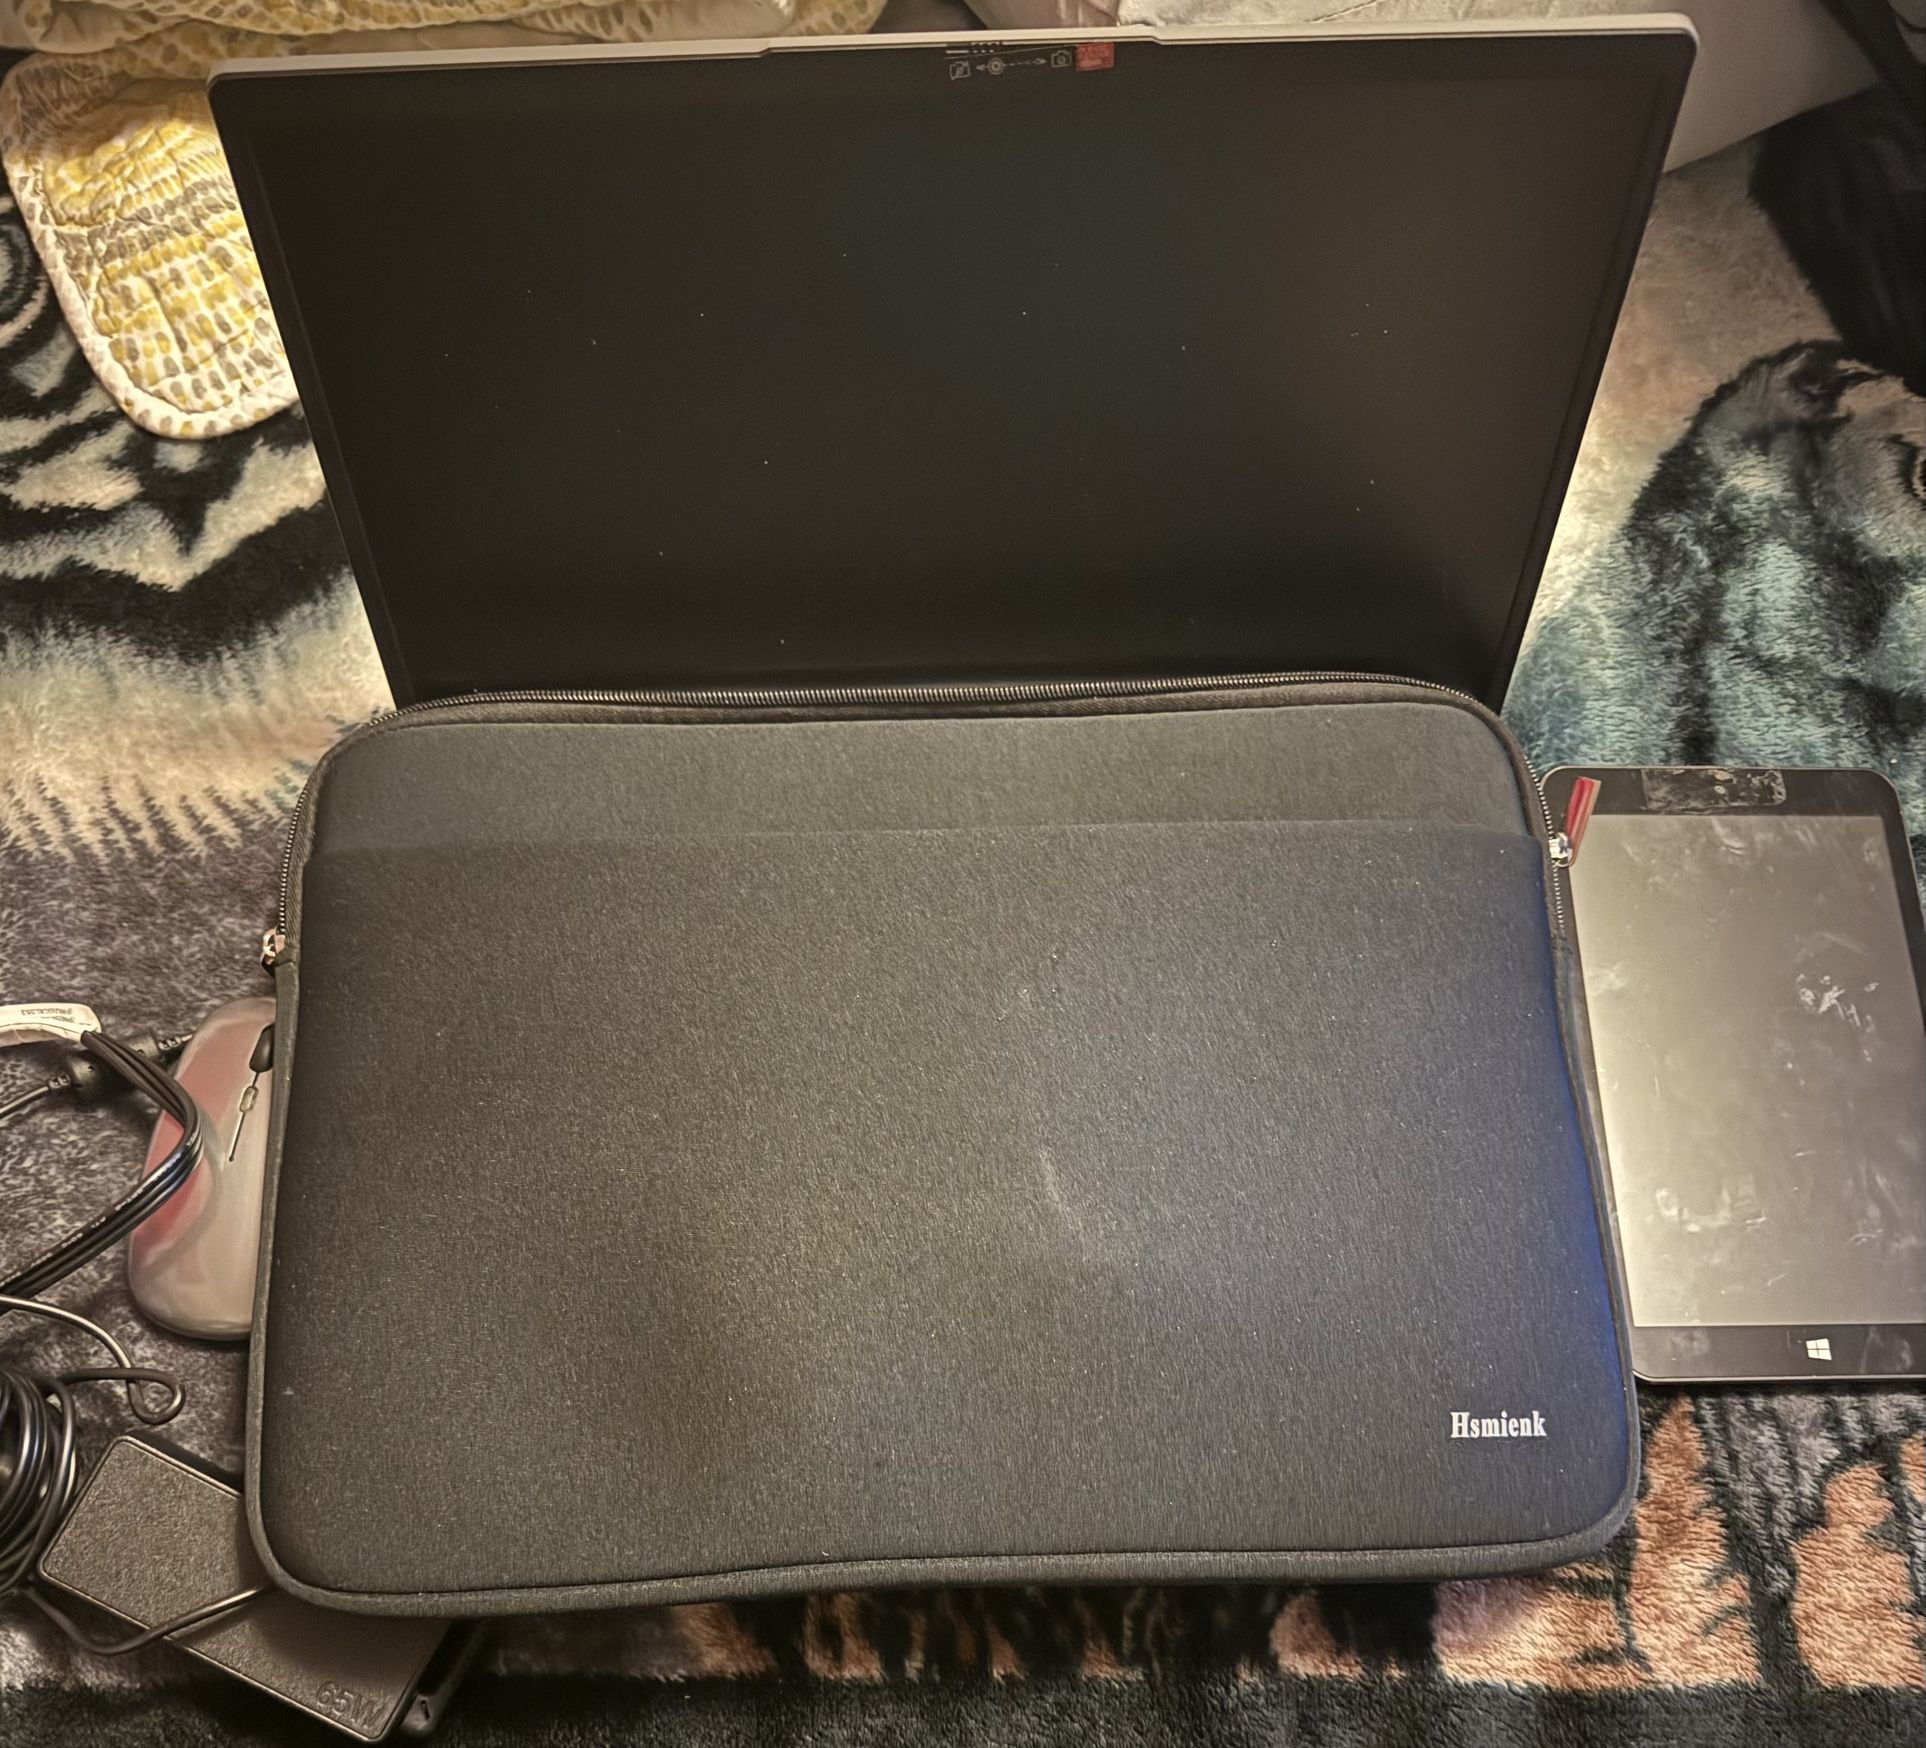 Lenovo Laptop And Digiland Tablet